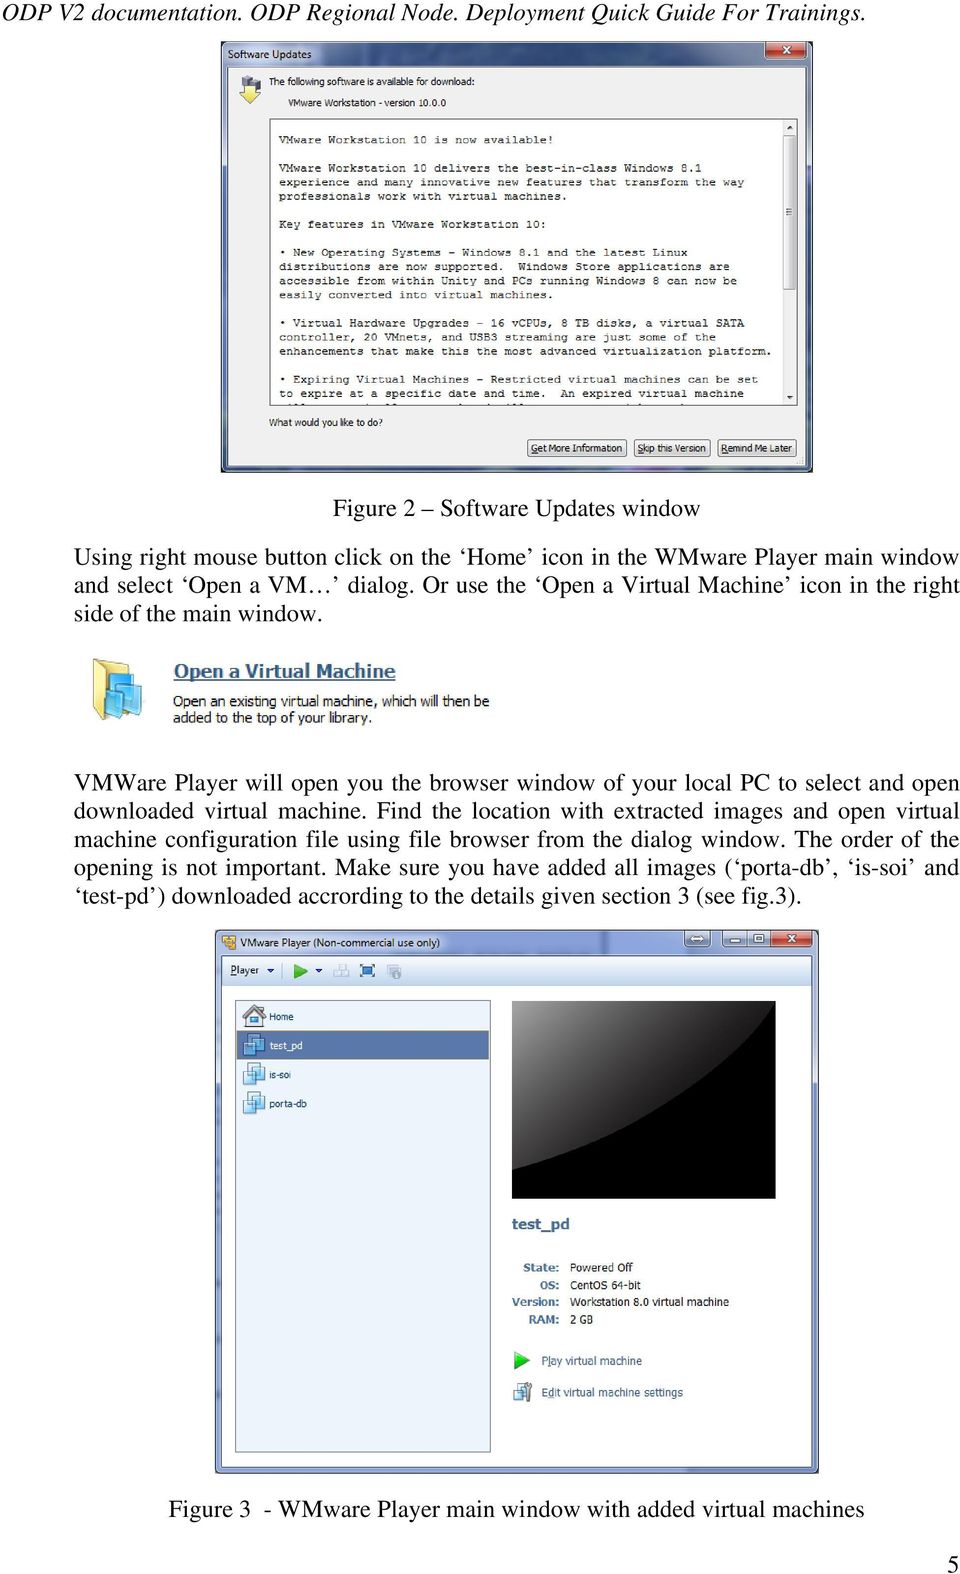 VMWare Player will open you the browser window of your local PC to select and open downloaded virtual machine.